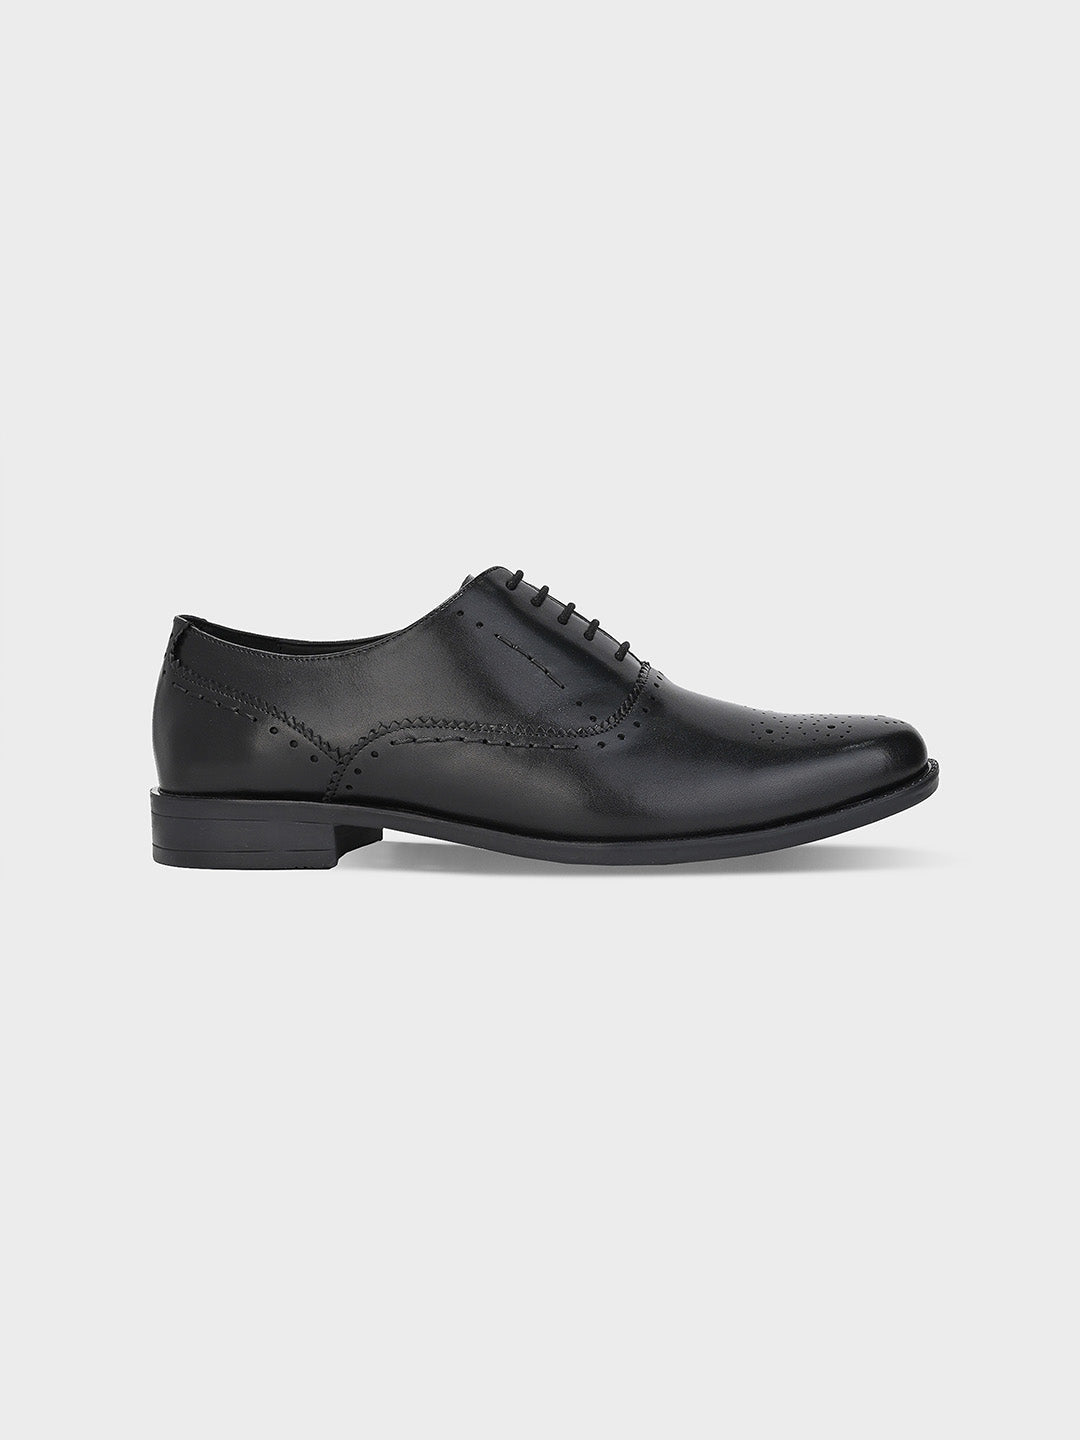 Men's Black Leather Brogue Lace-Up Shoes – One8 Select